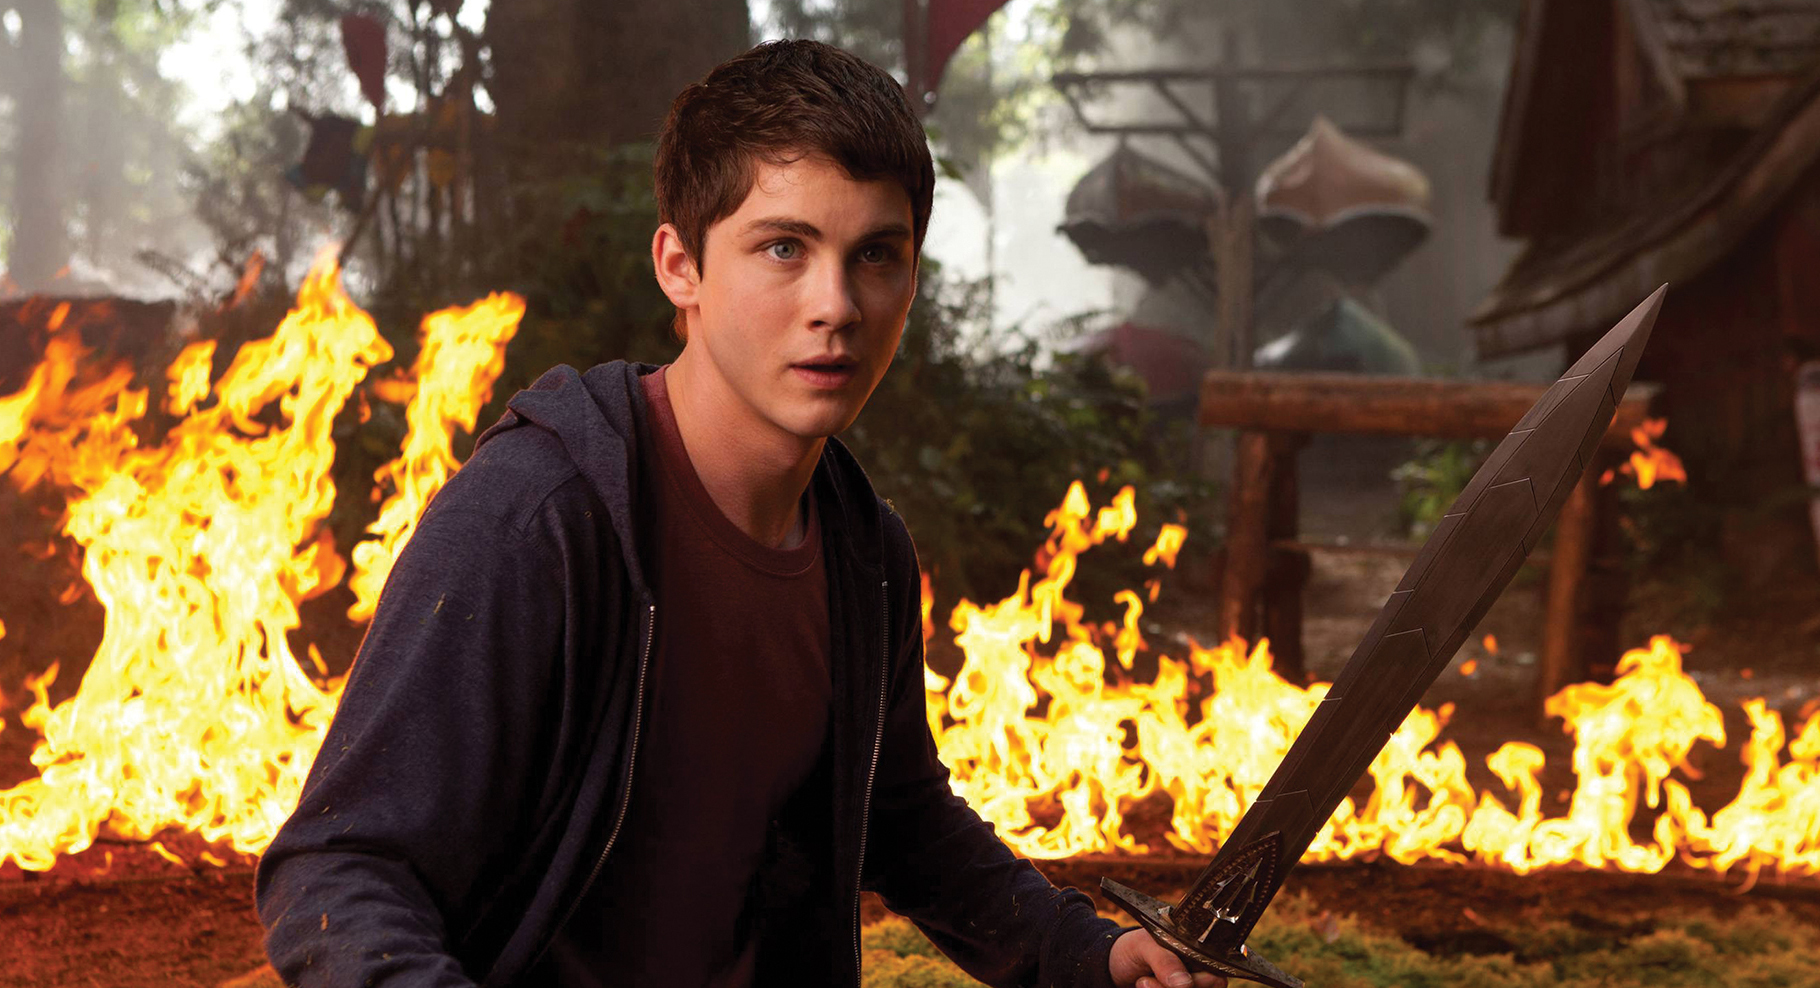 Gallery For Gt Percy Jackson Holding Sword